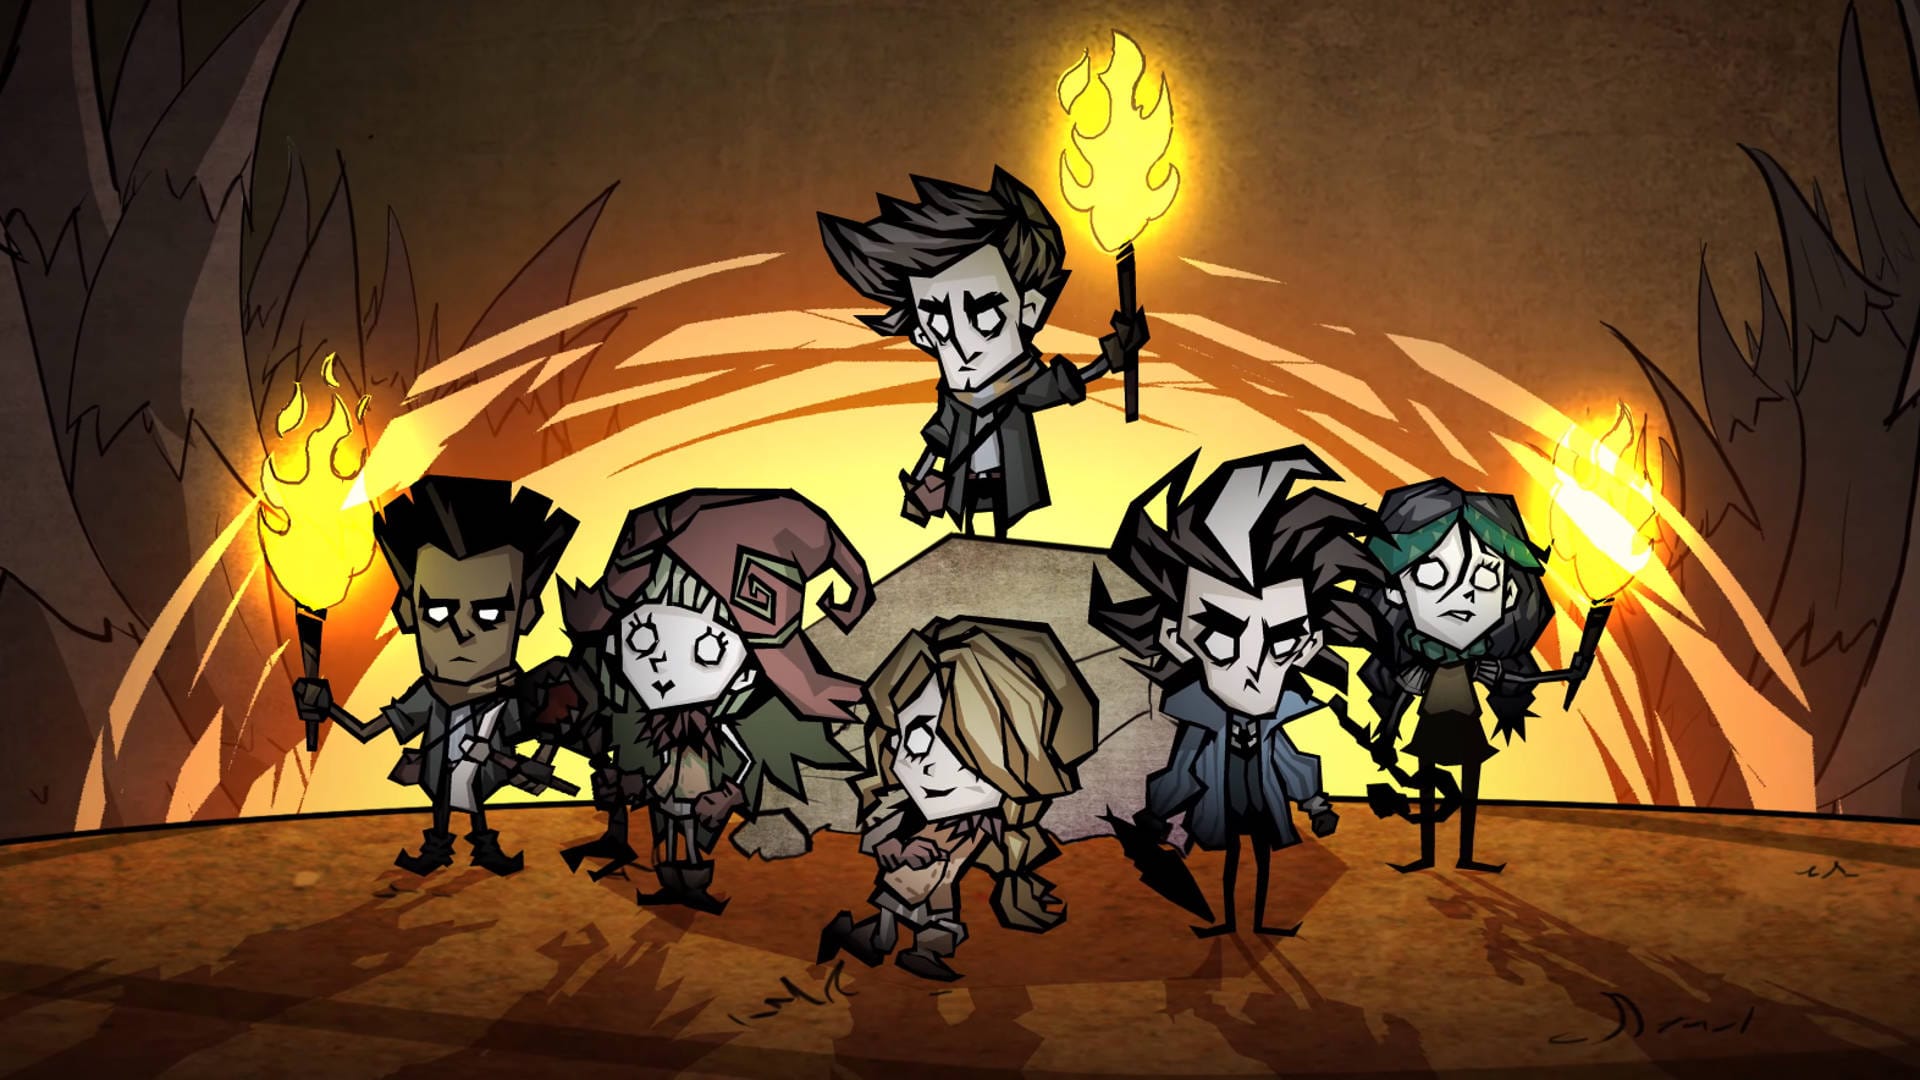 Don t start new. Don't Starve newhome. Донт старв тугезер. Don't Starve New Home. Don t Starve New Home.